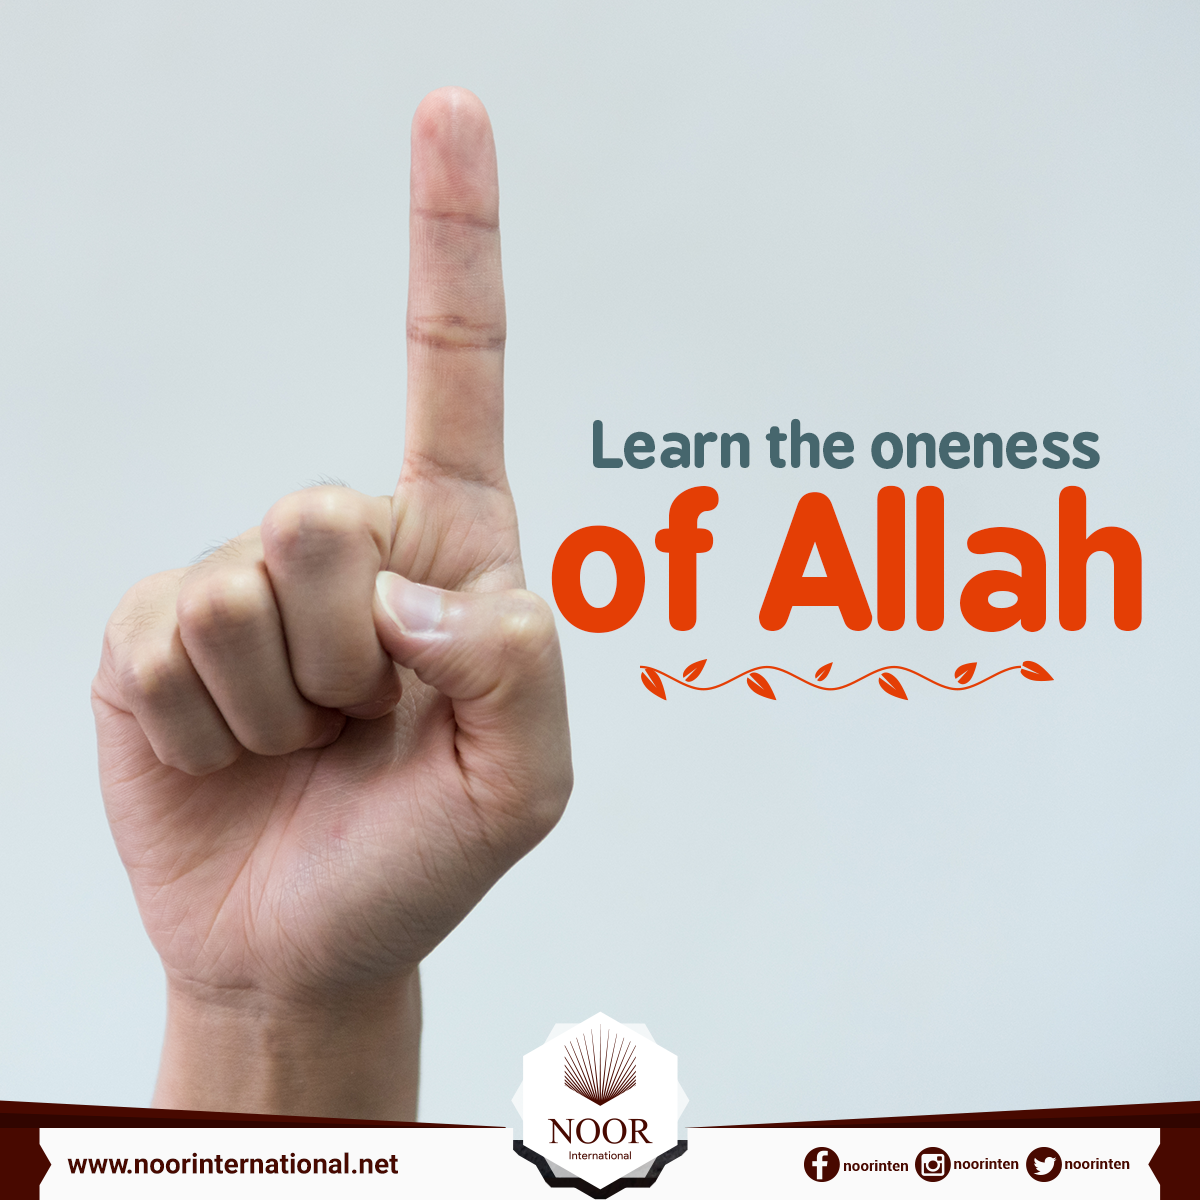 Learn the oneness of Allah